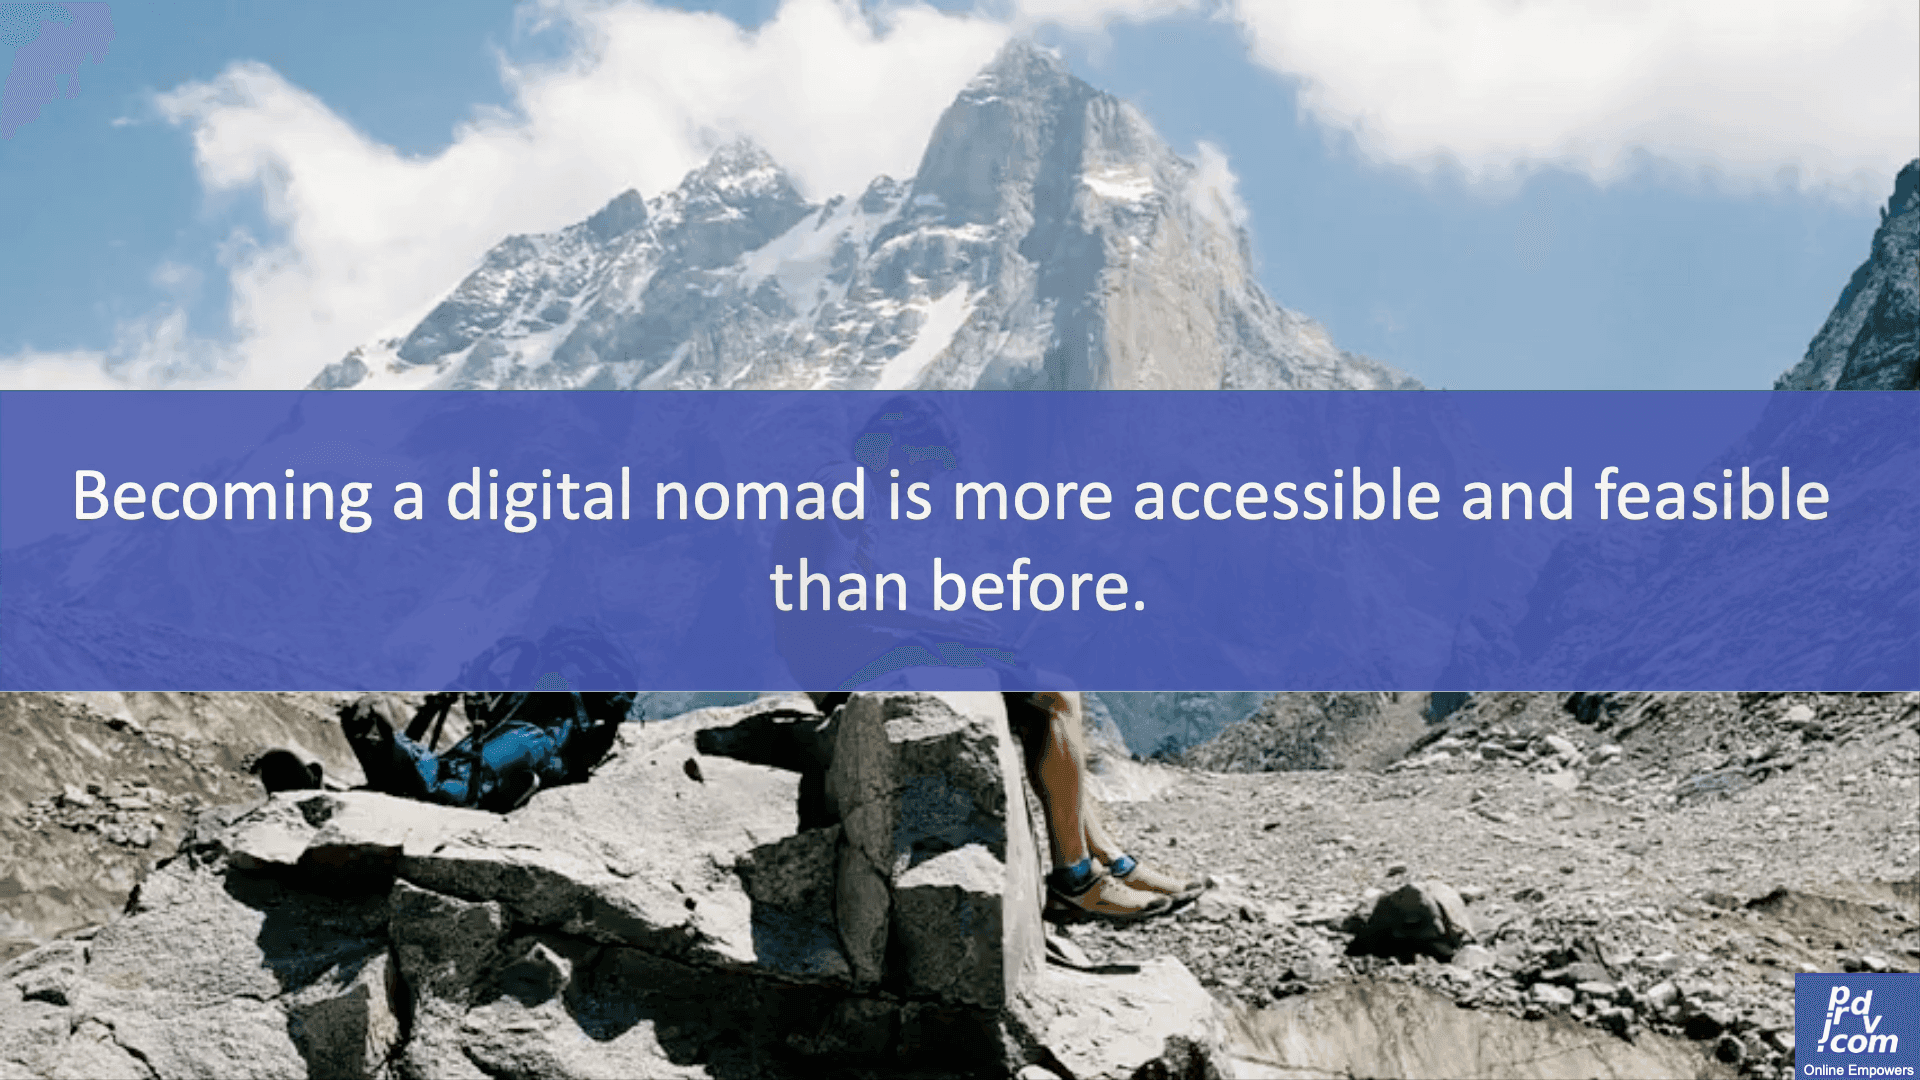 Becoming a digital nomad is more accessible and feasible than before.